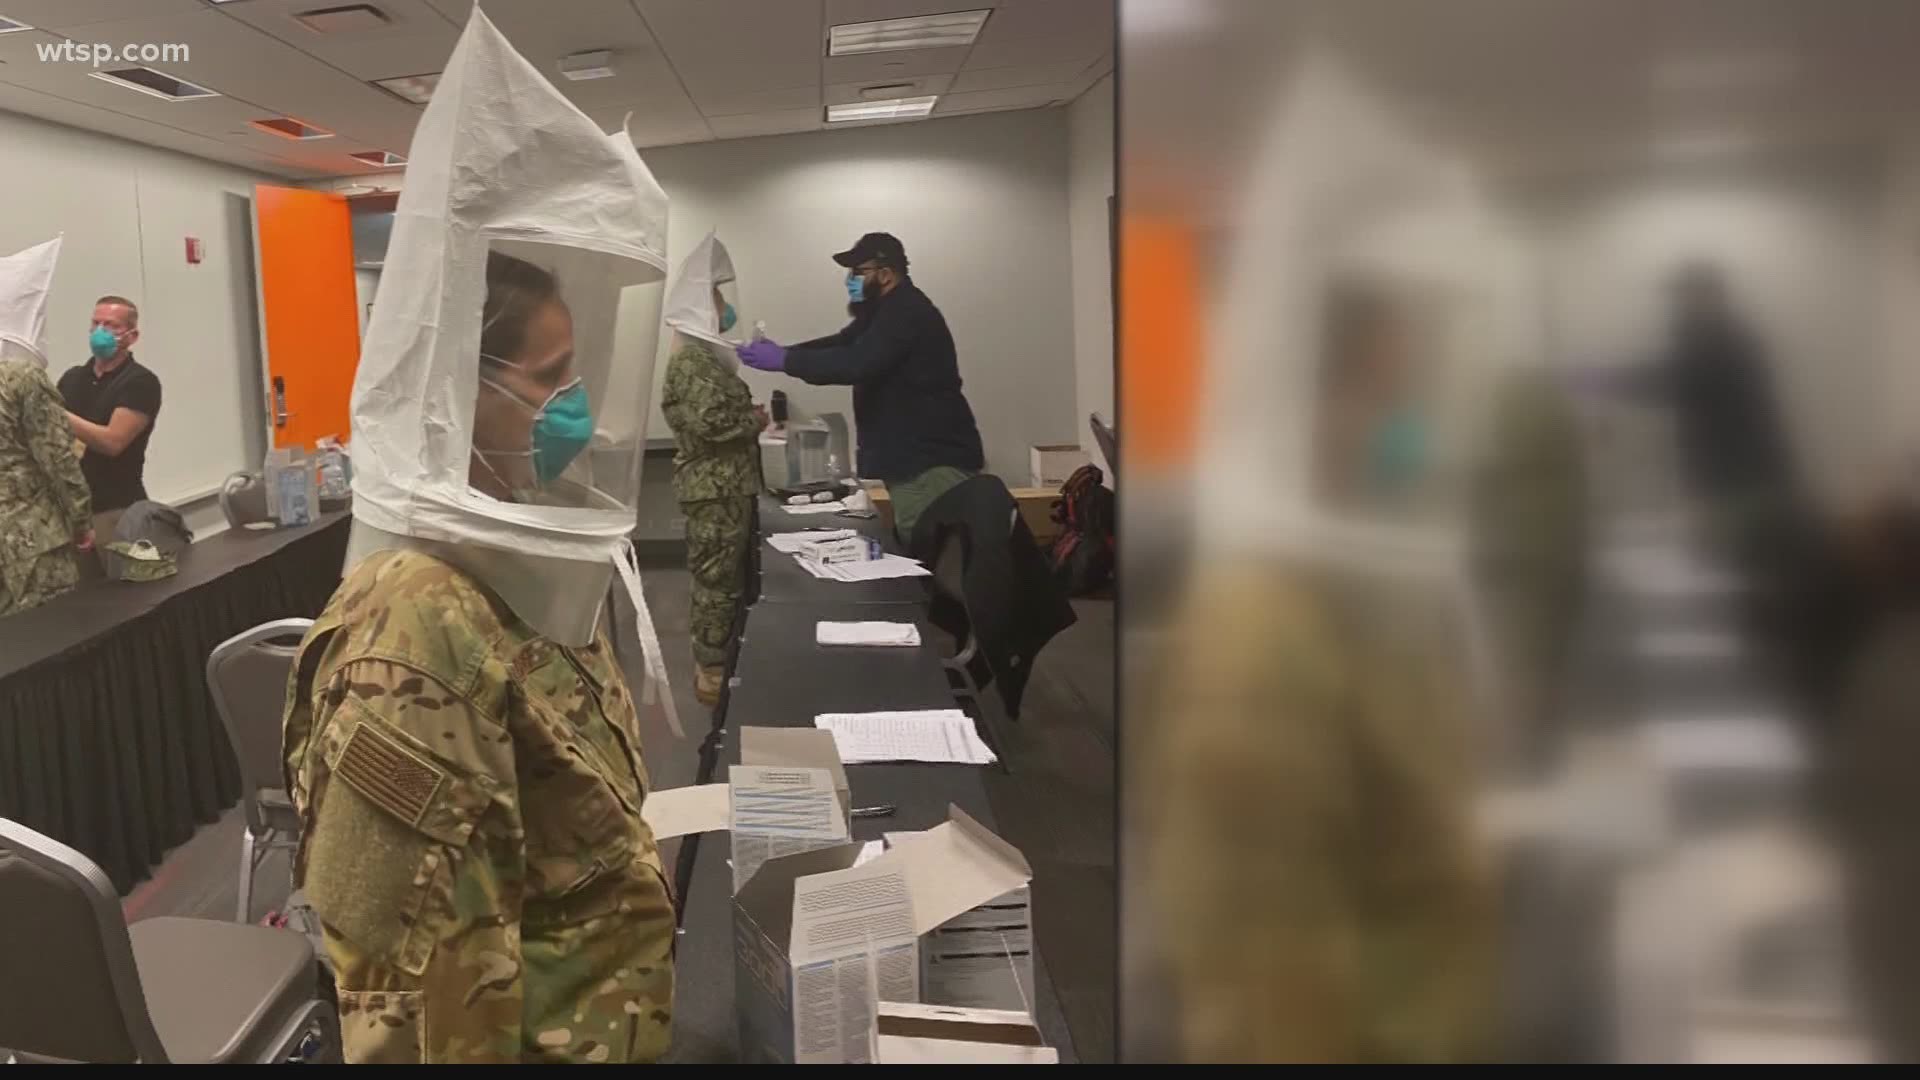 Doctors with the U.S. Air Force Reserves from MacDill joined thousands of other military members who were deployed to the nation’s coronavirus epicenter.